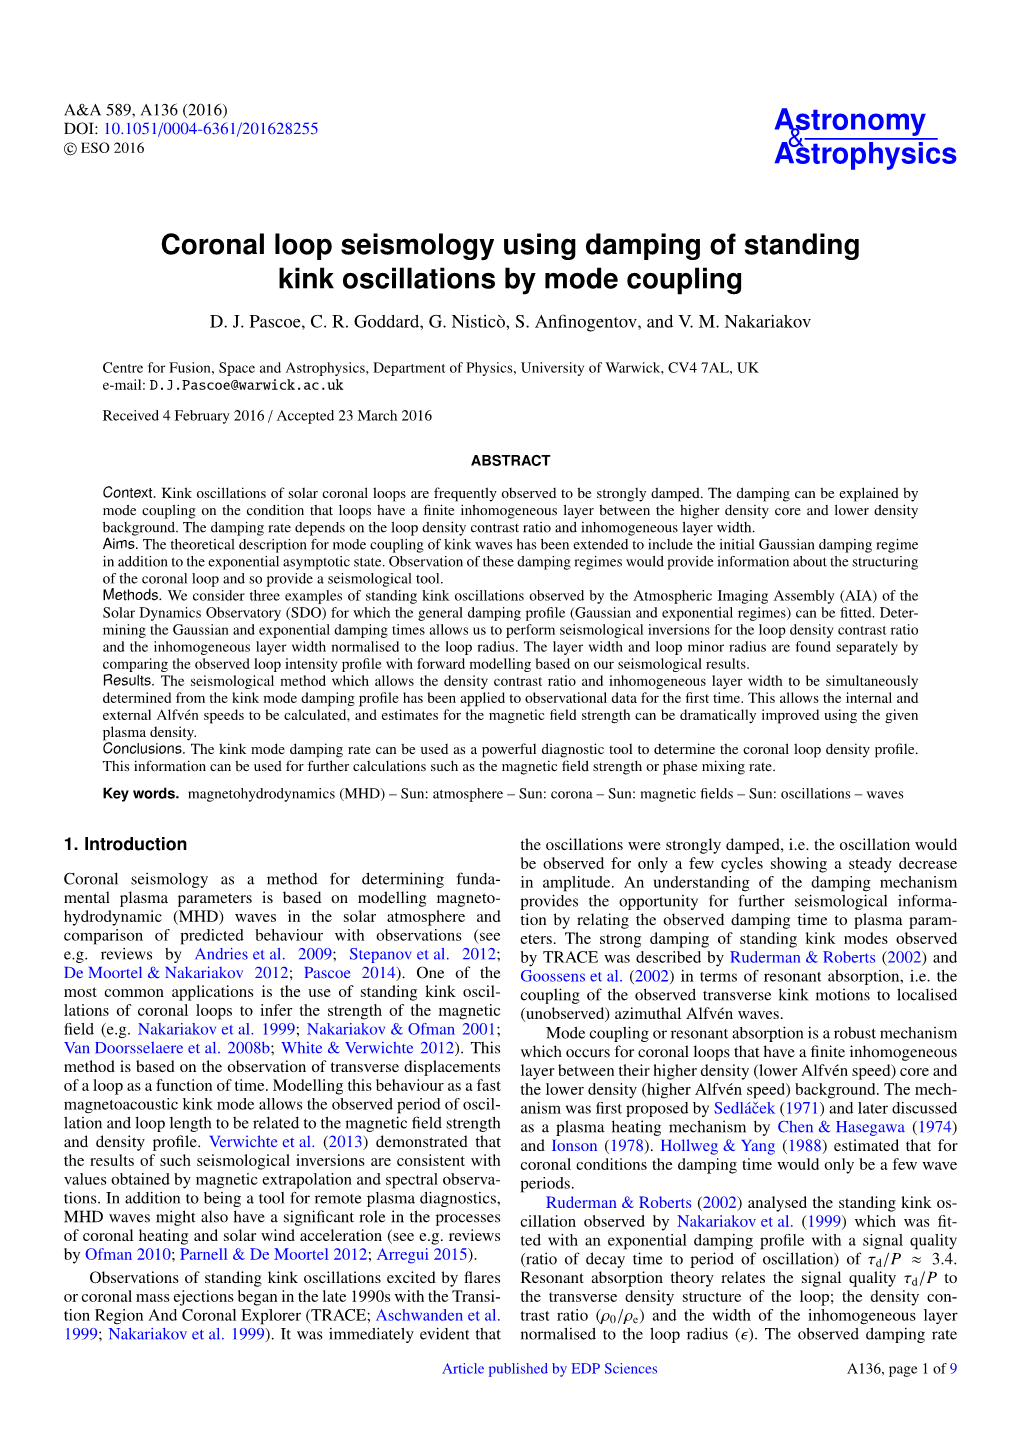 Coronal Loop Seismology Using Damping of Standing Kink Oscillations by Mode Coupling D